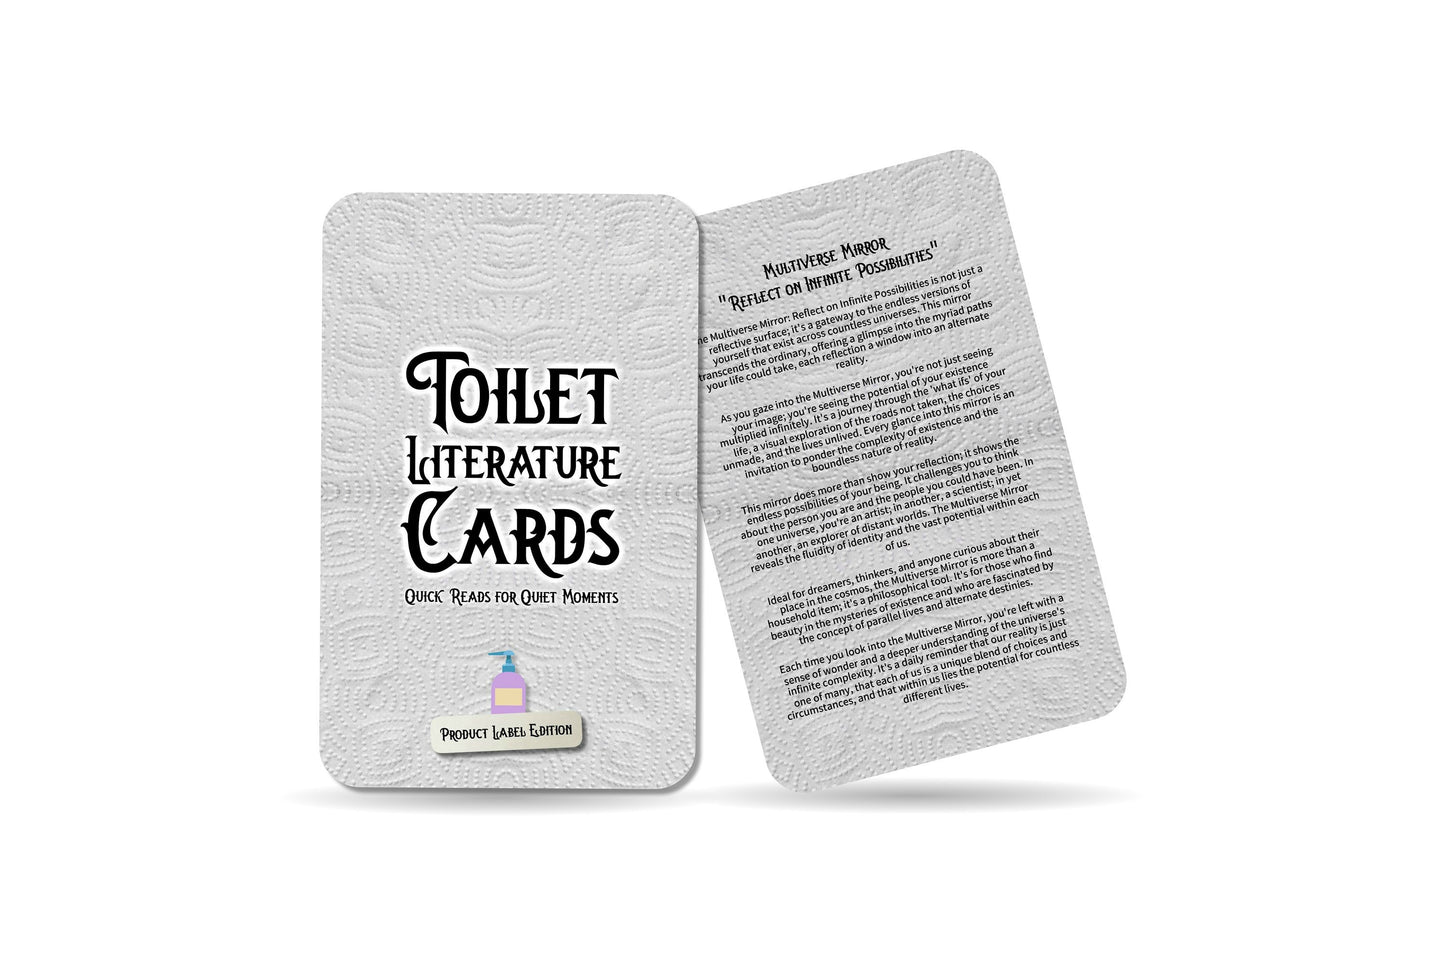 Toilet Literature Cards -  Quick Reads for Quiet Moments - 22 Cards